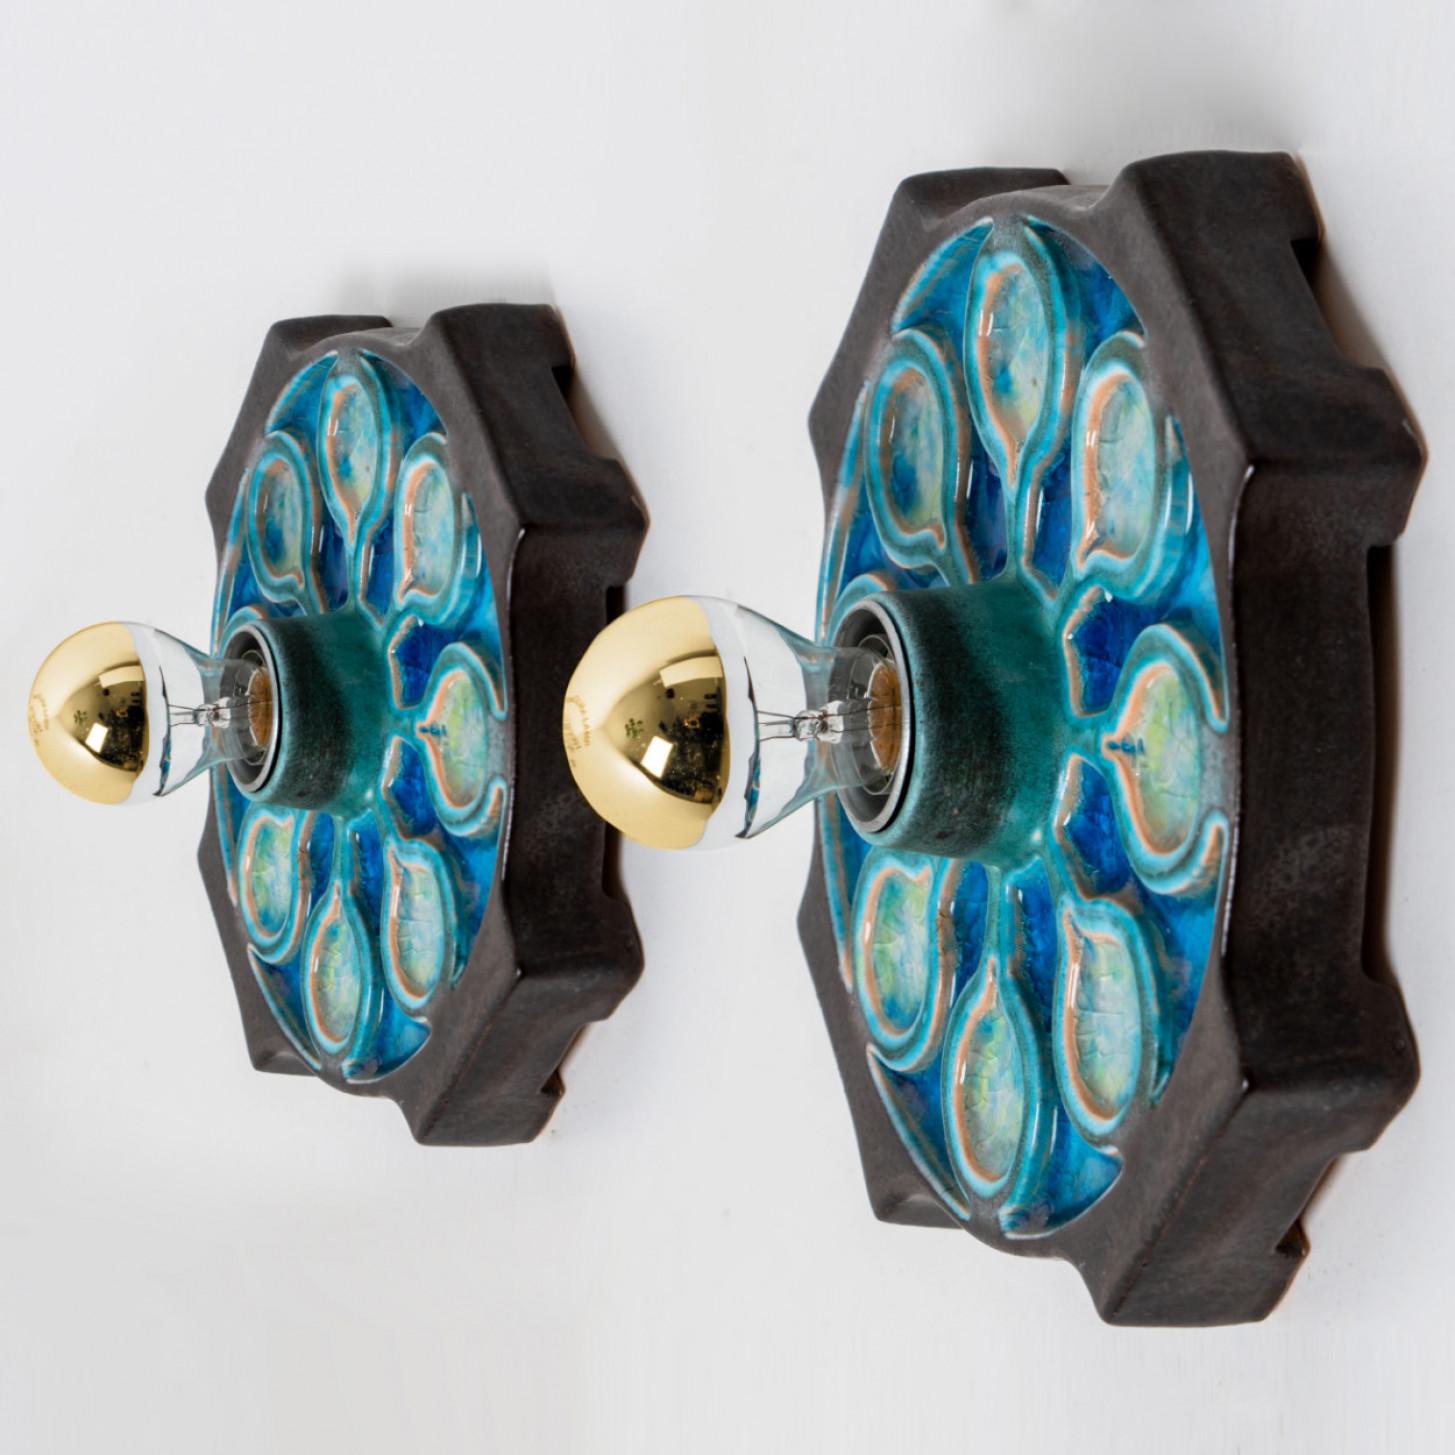 Mid-Century Modern 1 of the 2 Blue Ceramic Glazed Wall Light or Flush Mount, 1960, Germany For Sale